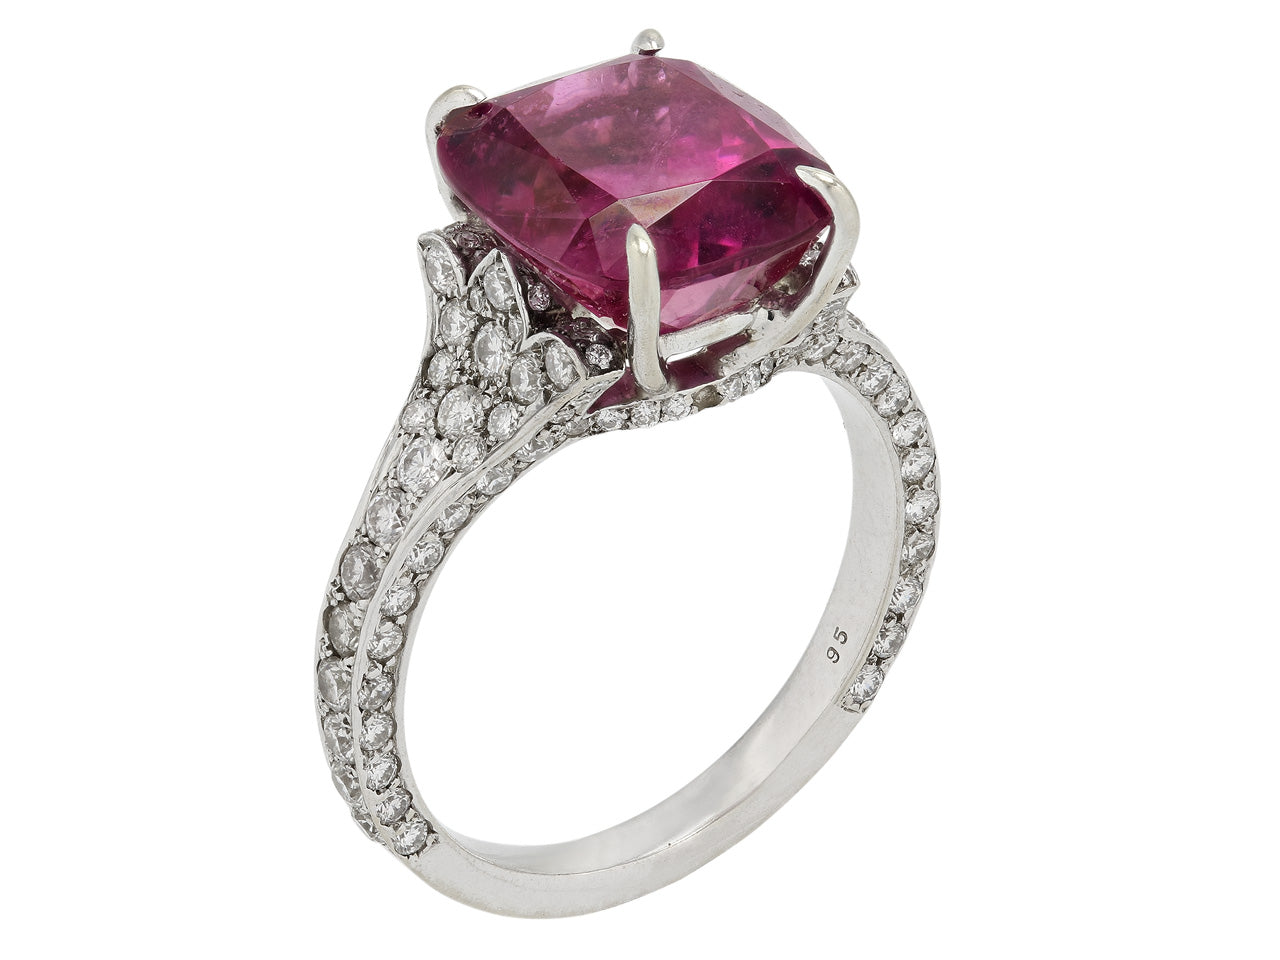 Pink Tourmaline and Diamond Ring in 14K White Gold